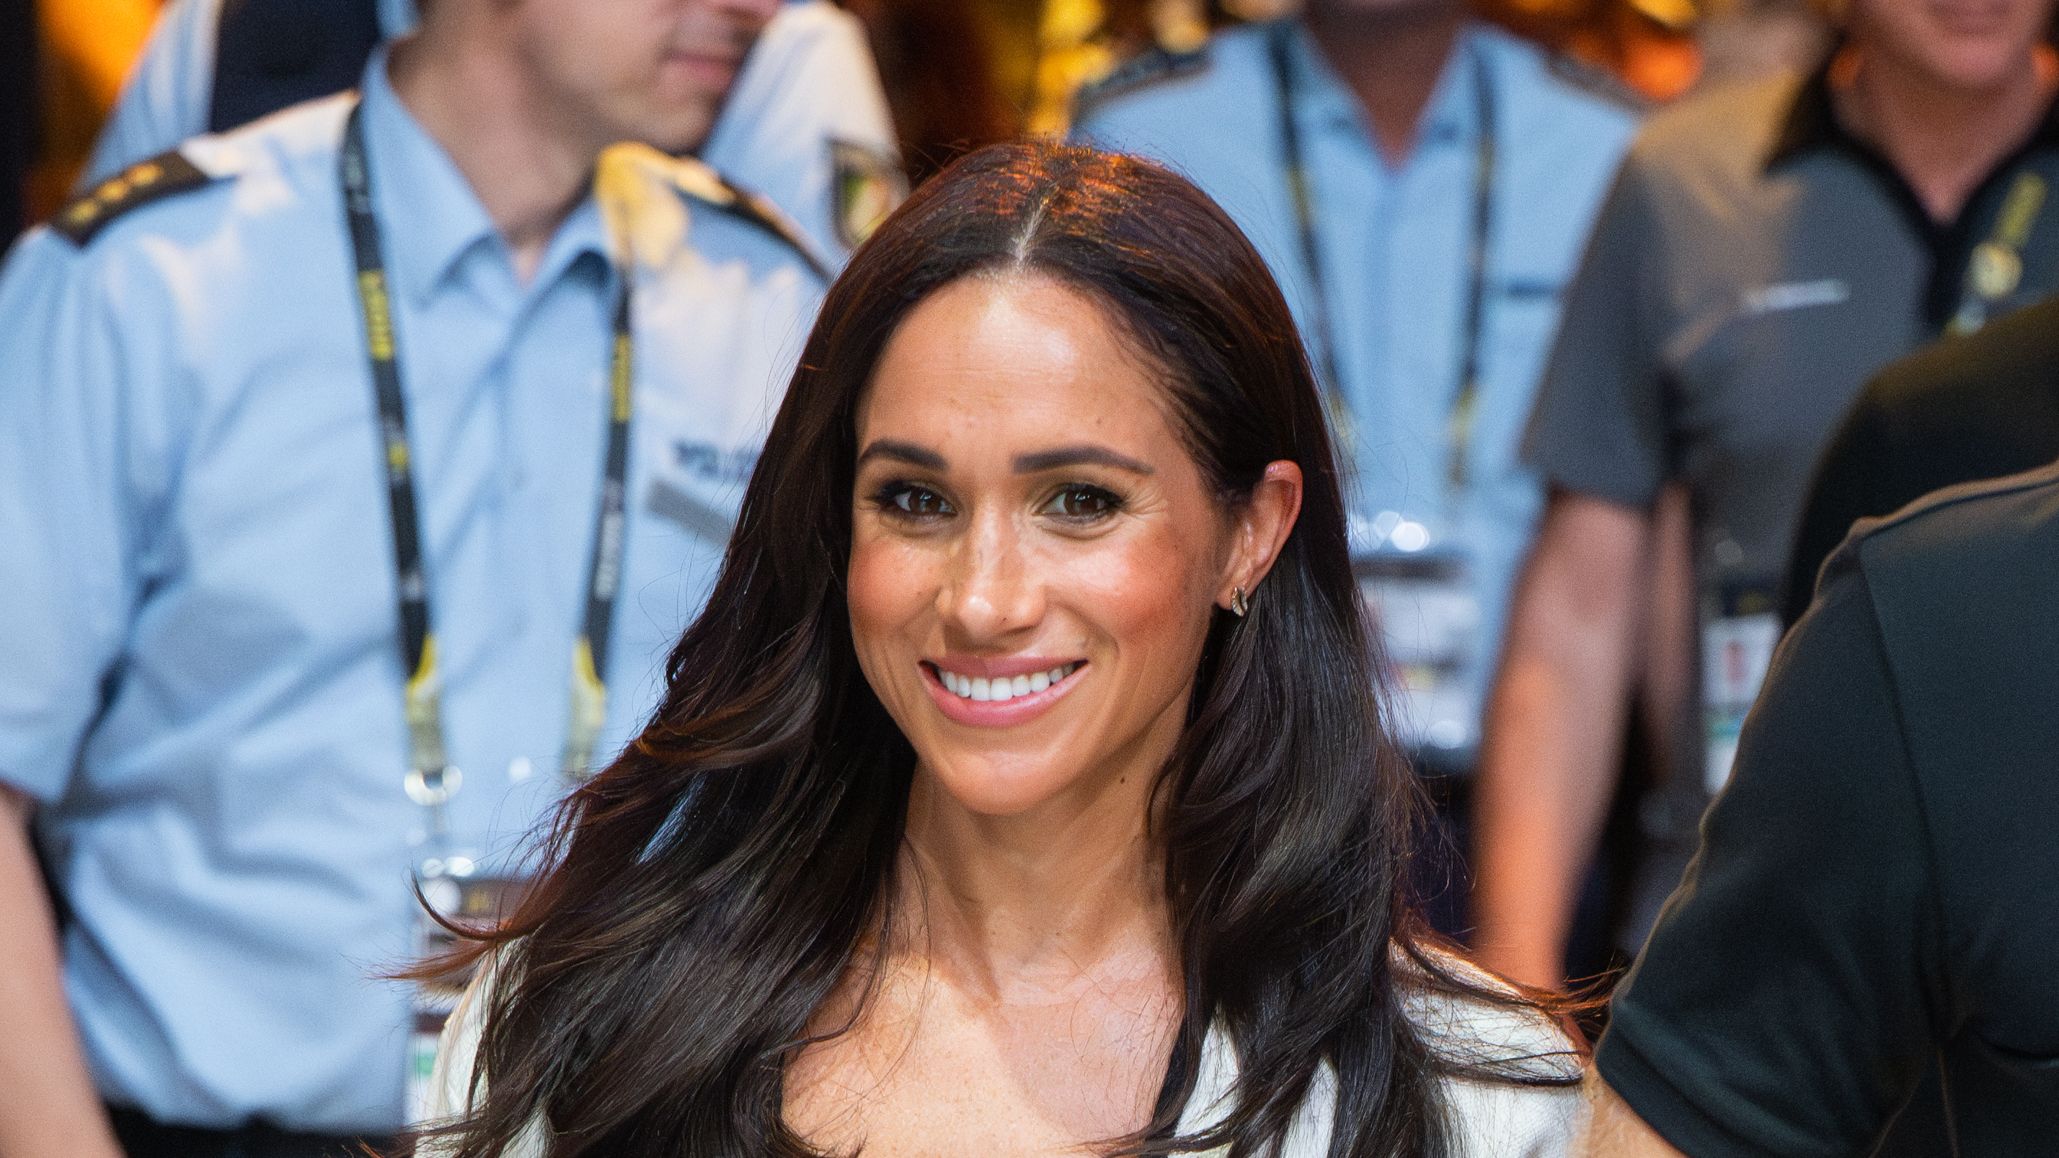 Meghan Markle wears a shorts suit and Chanel ballet flats for the Invictus  Games